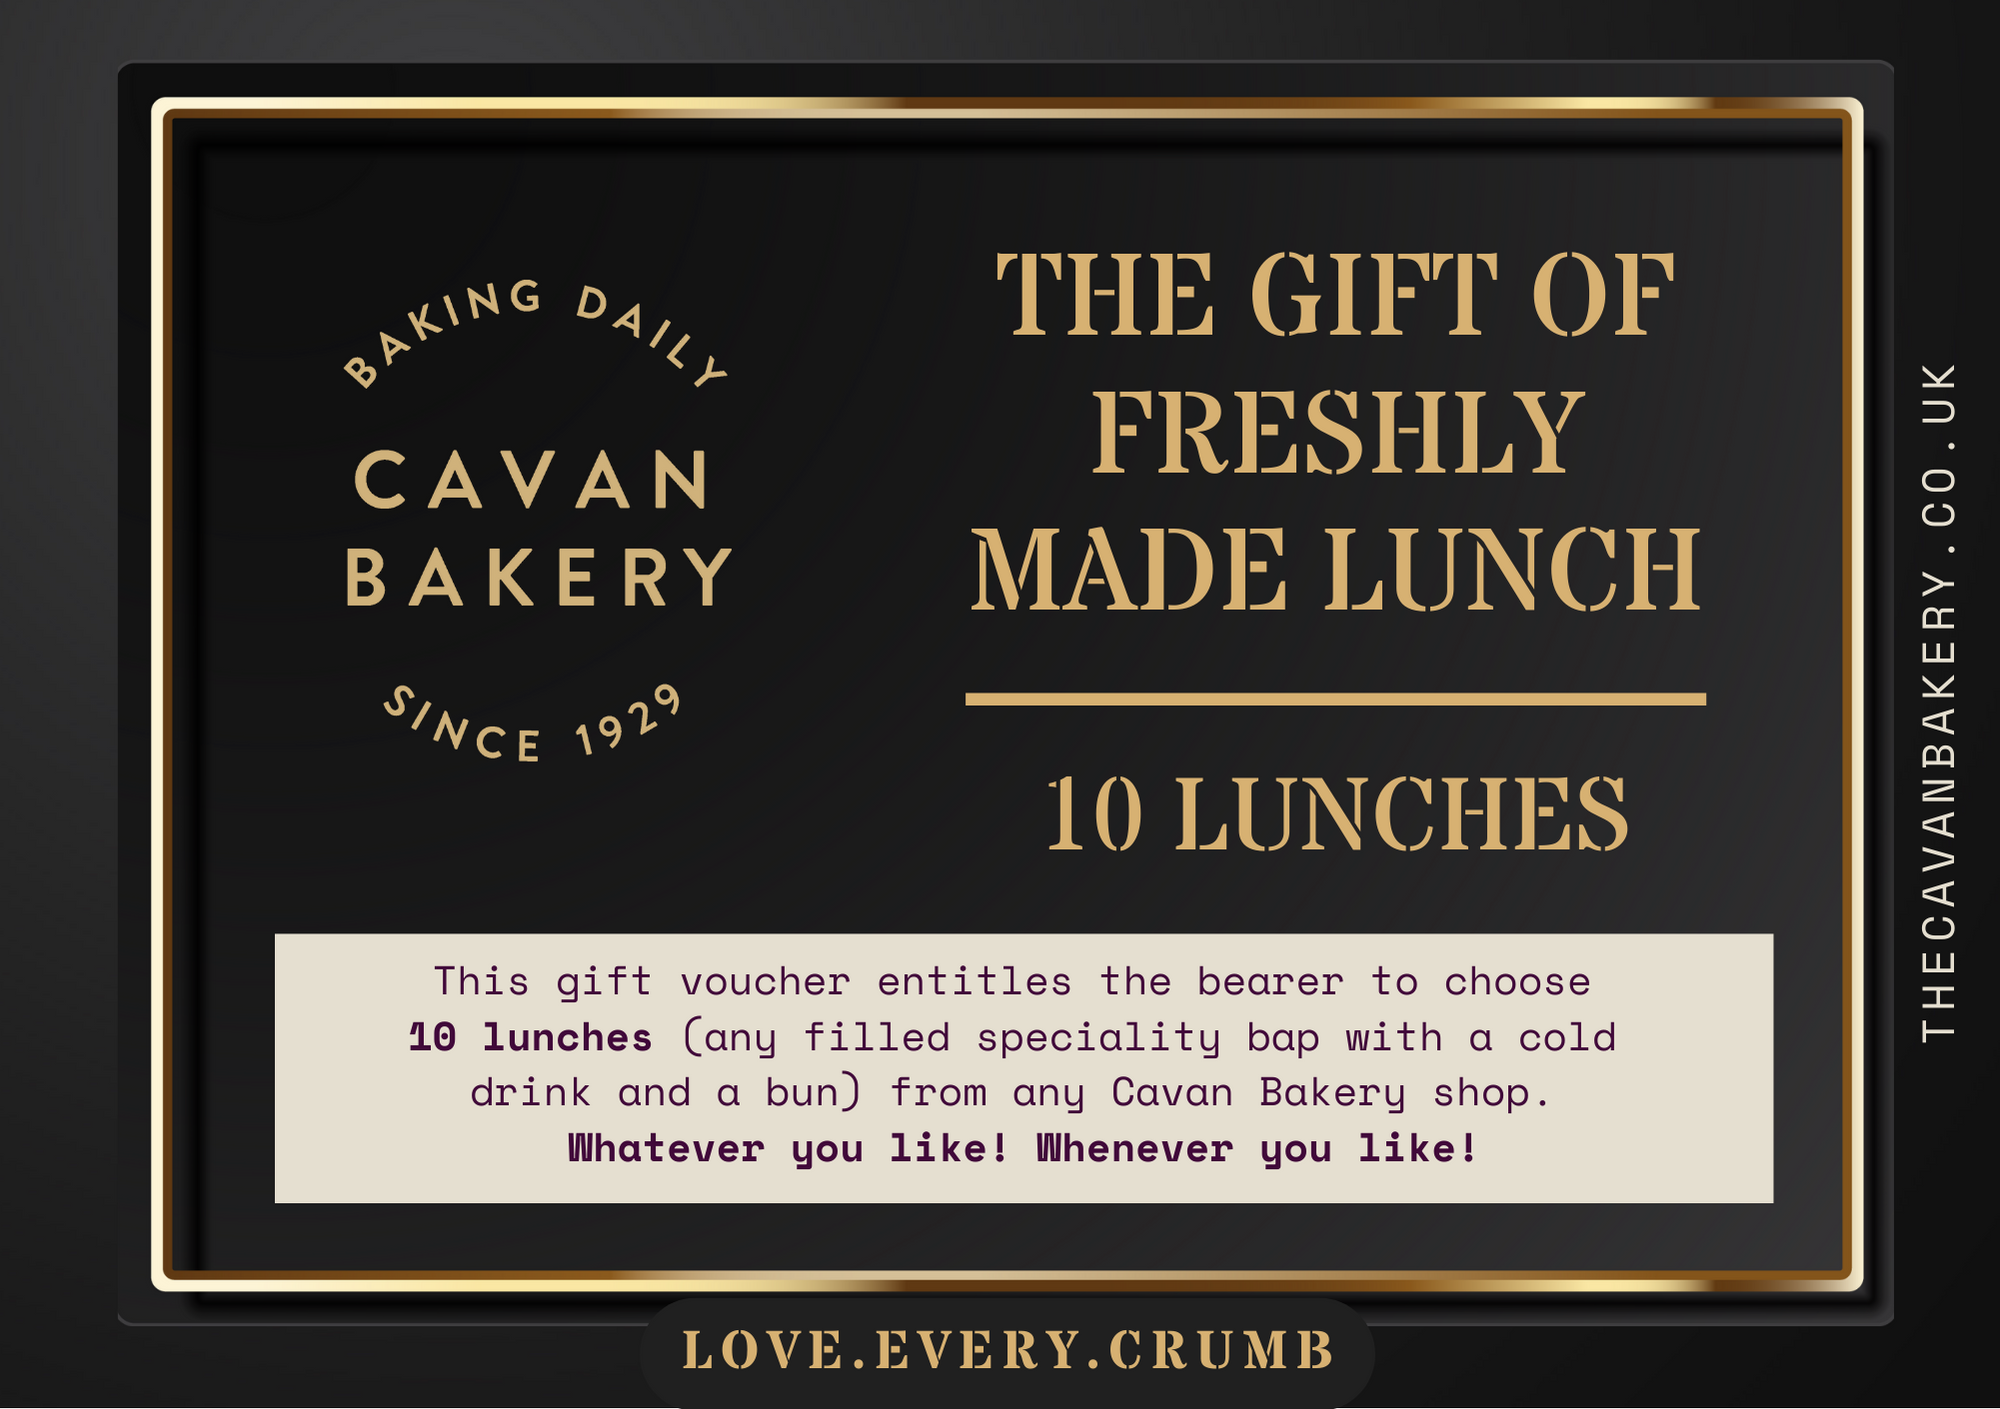 Lunch Gift Voucher (10 lunches)